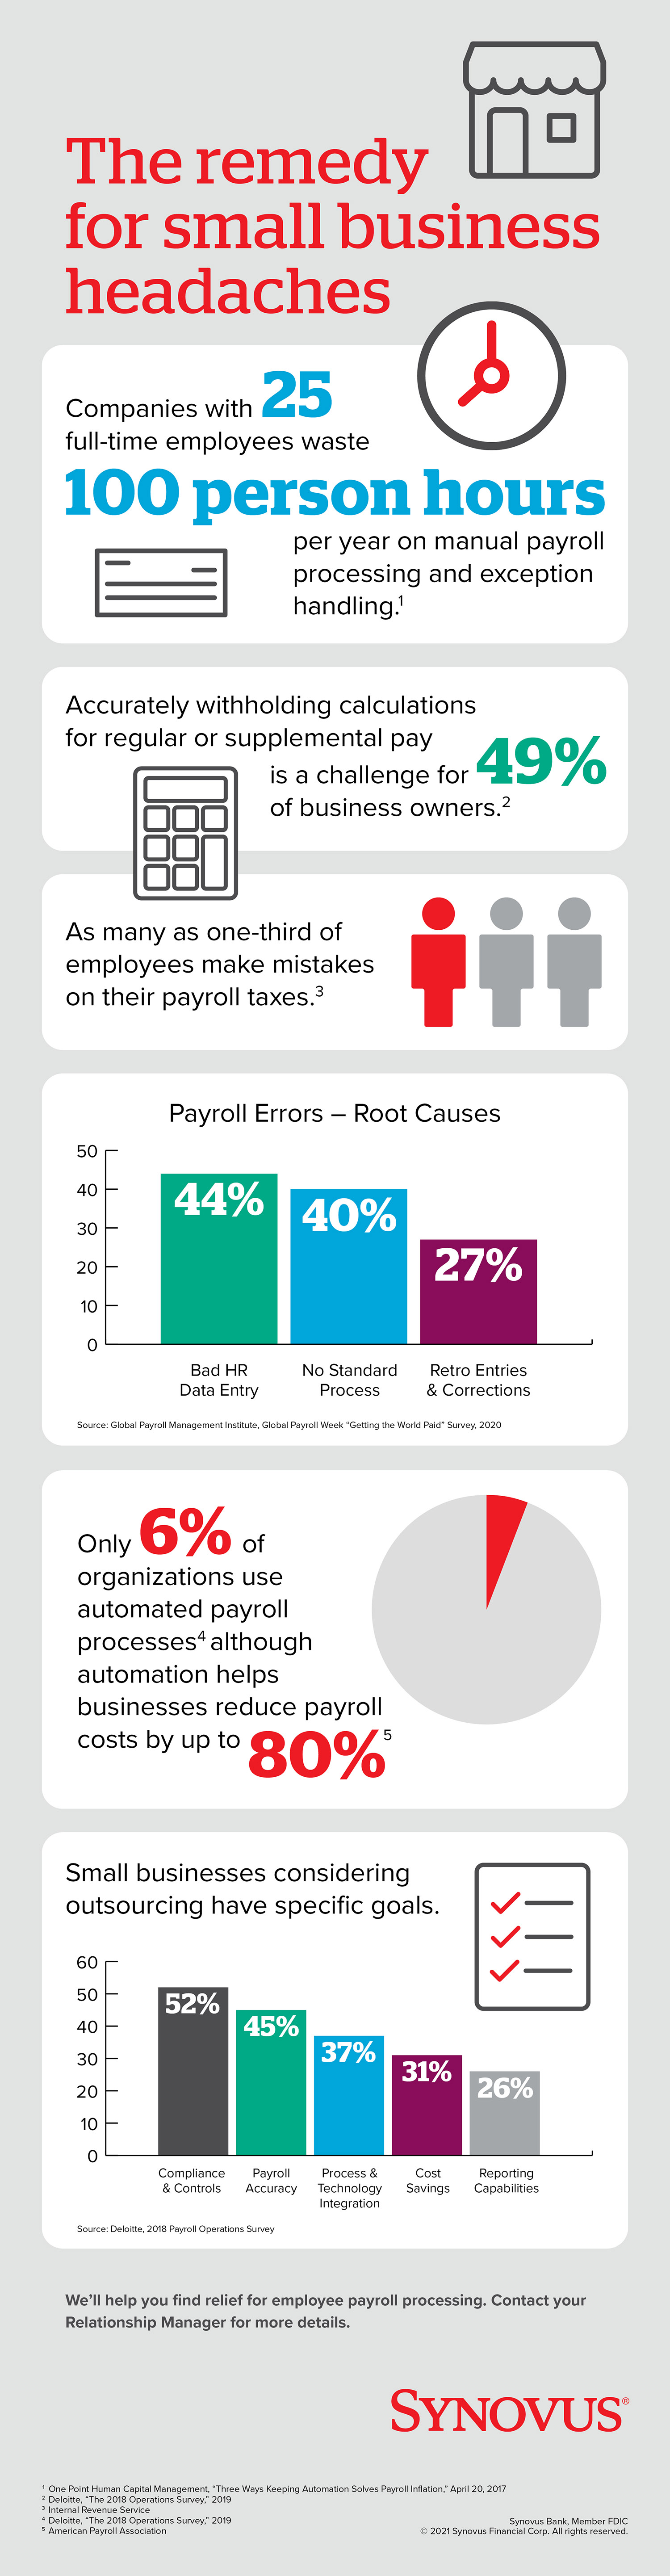 Infographic listing payroll outsourcing facts. A full description of the infographic is available through a link beneath the image.